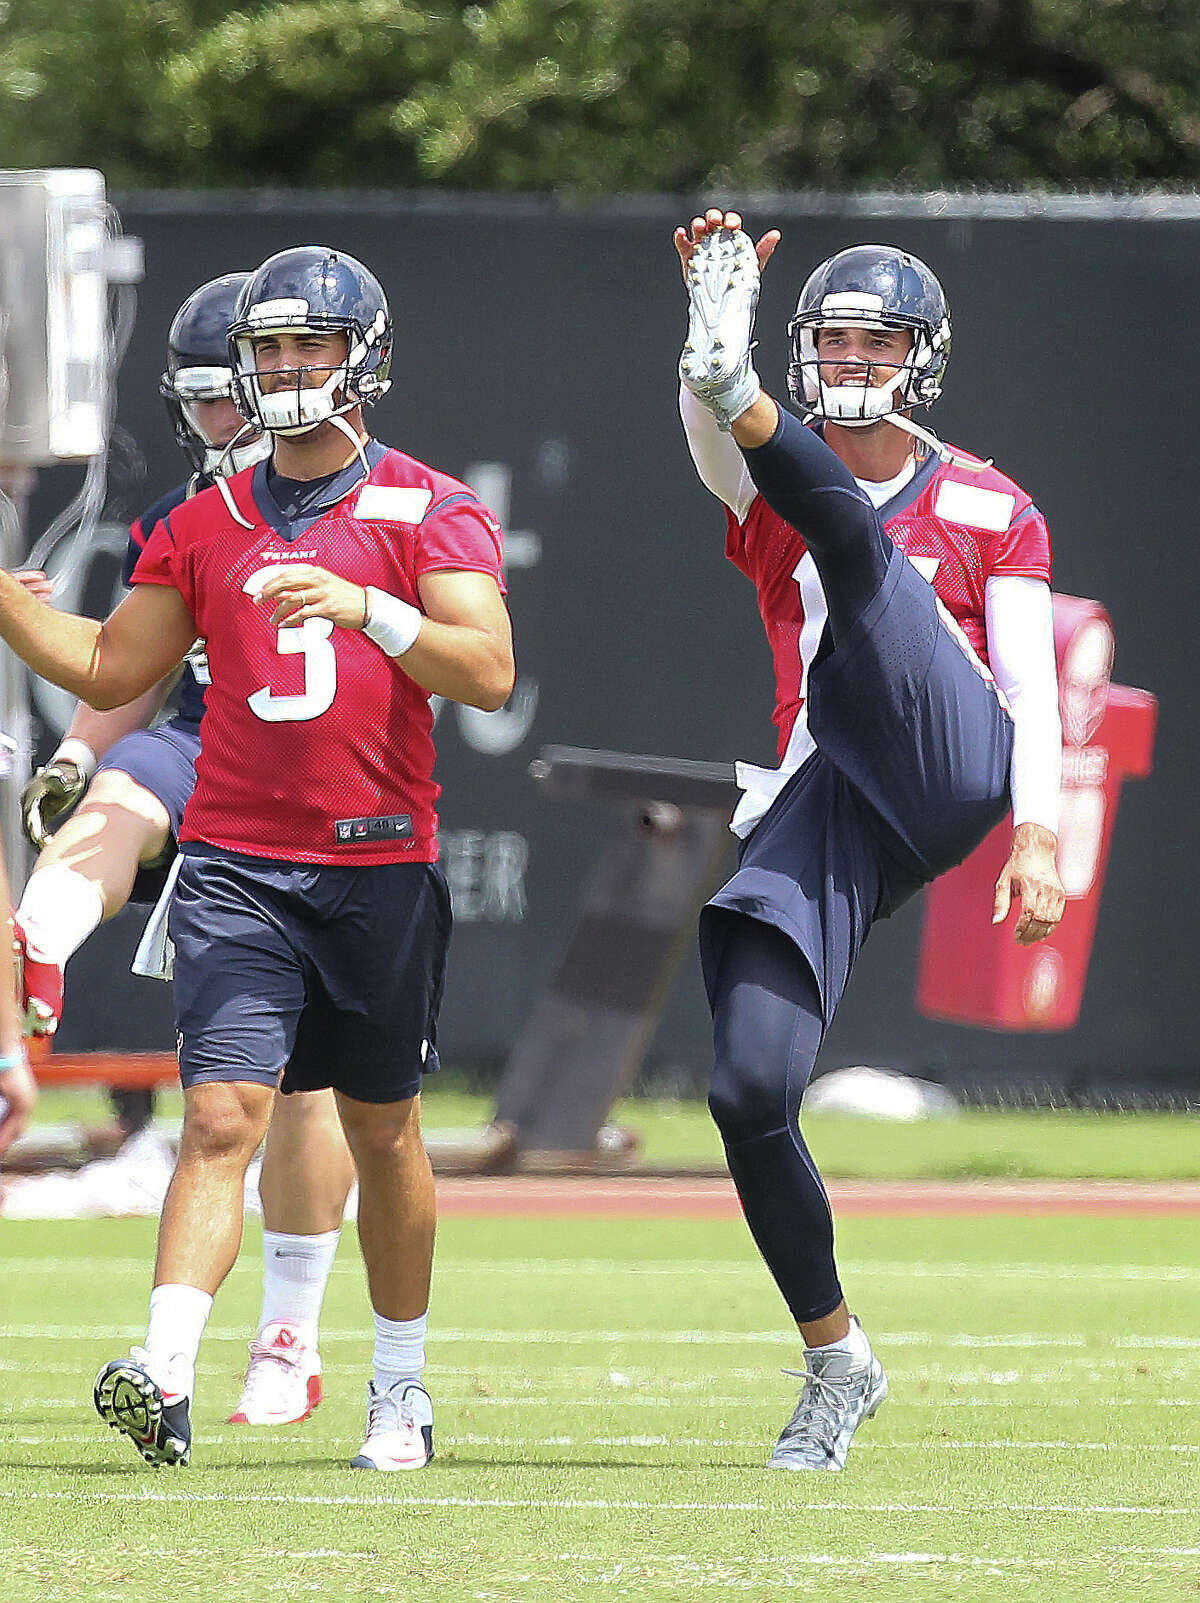 Texans Quarterback Brock Osweiler participates in the first day of OTAs Monday, May 23, 2016, in Houston. Quarterback Tom Savage #3 is (left).